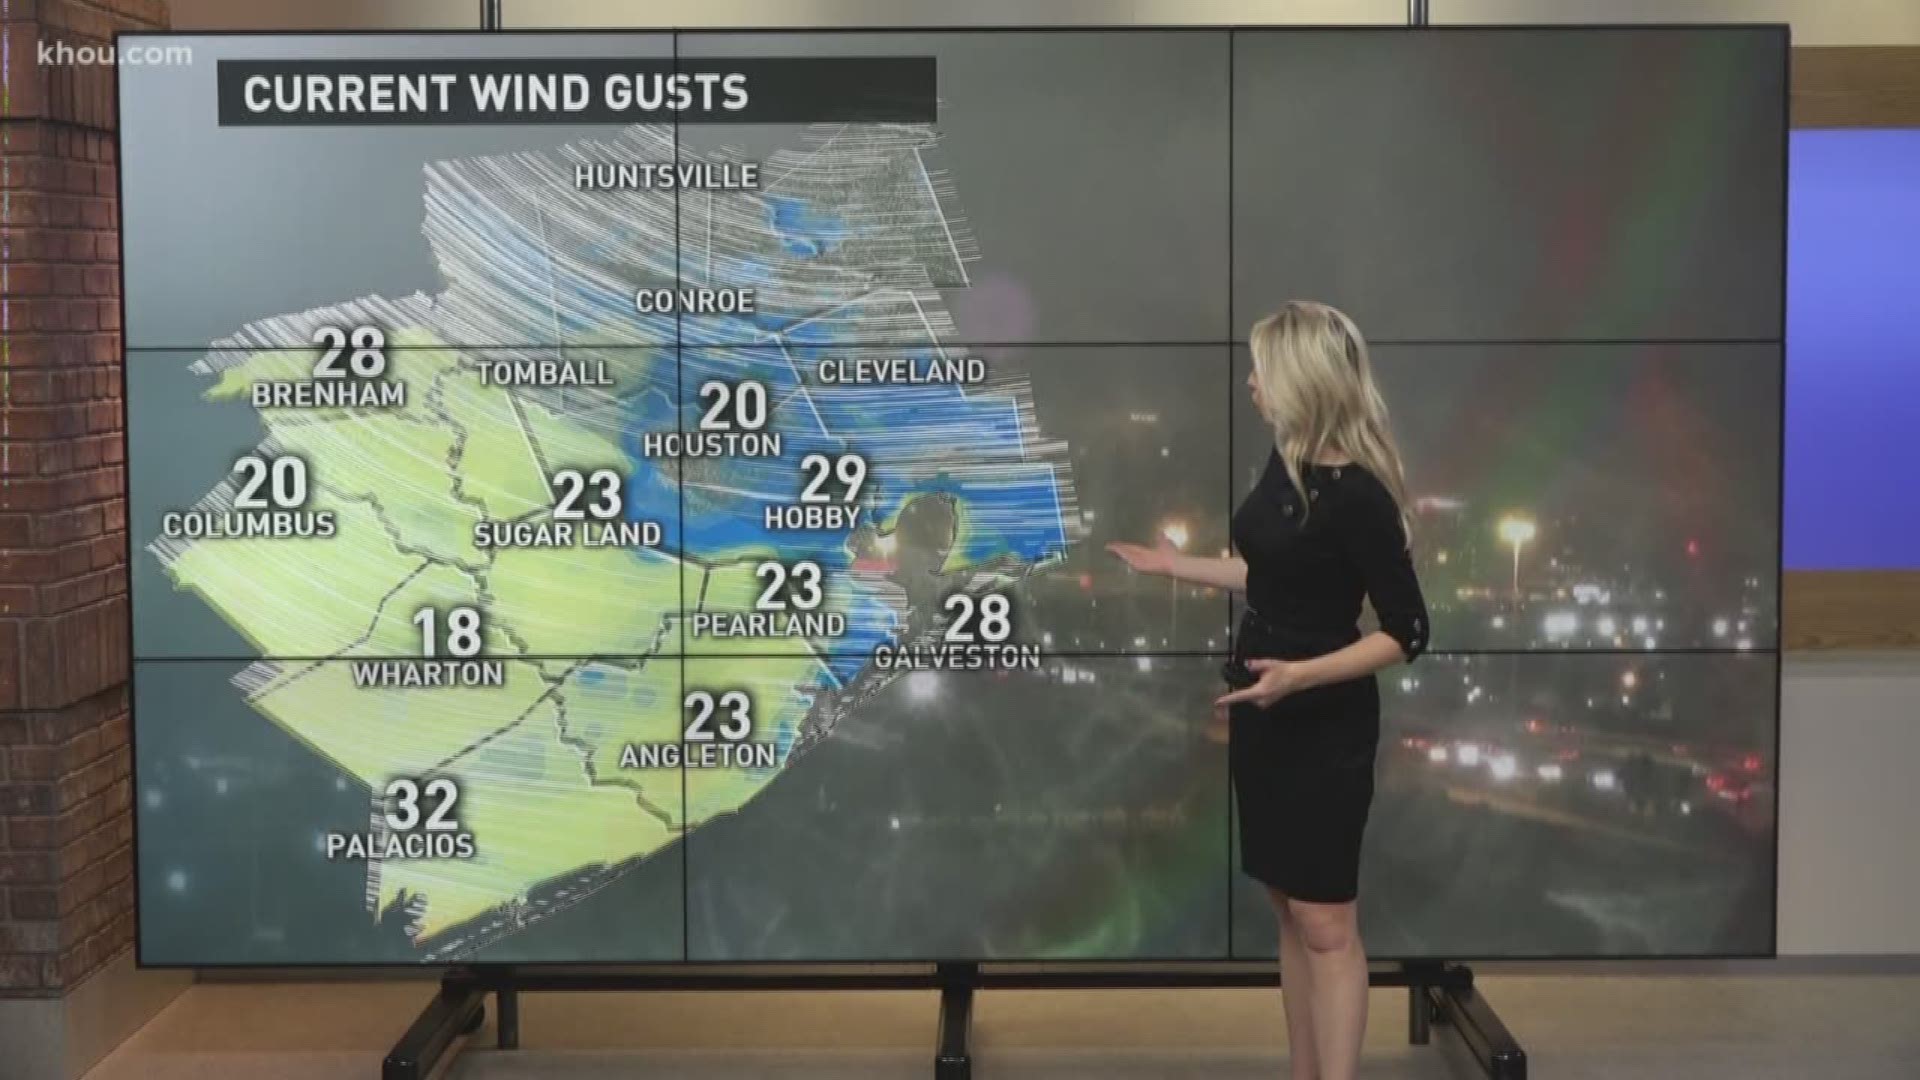 The winds will really pick up across southeast Texas in the coming hours. With wind gusts up to 45 mph Friday, we could see scattered power outages, downed tree branches and debris on the roadways.